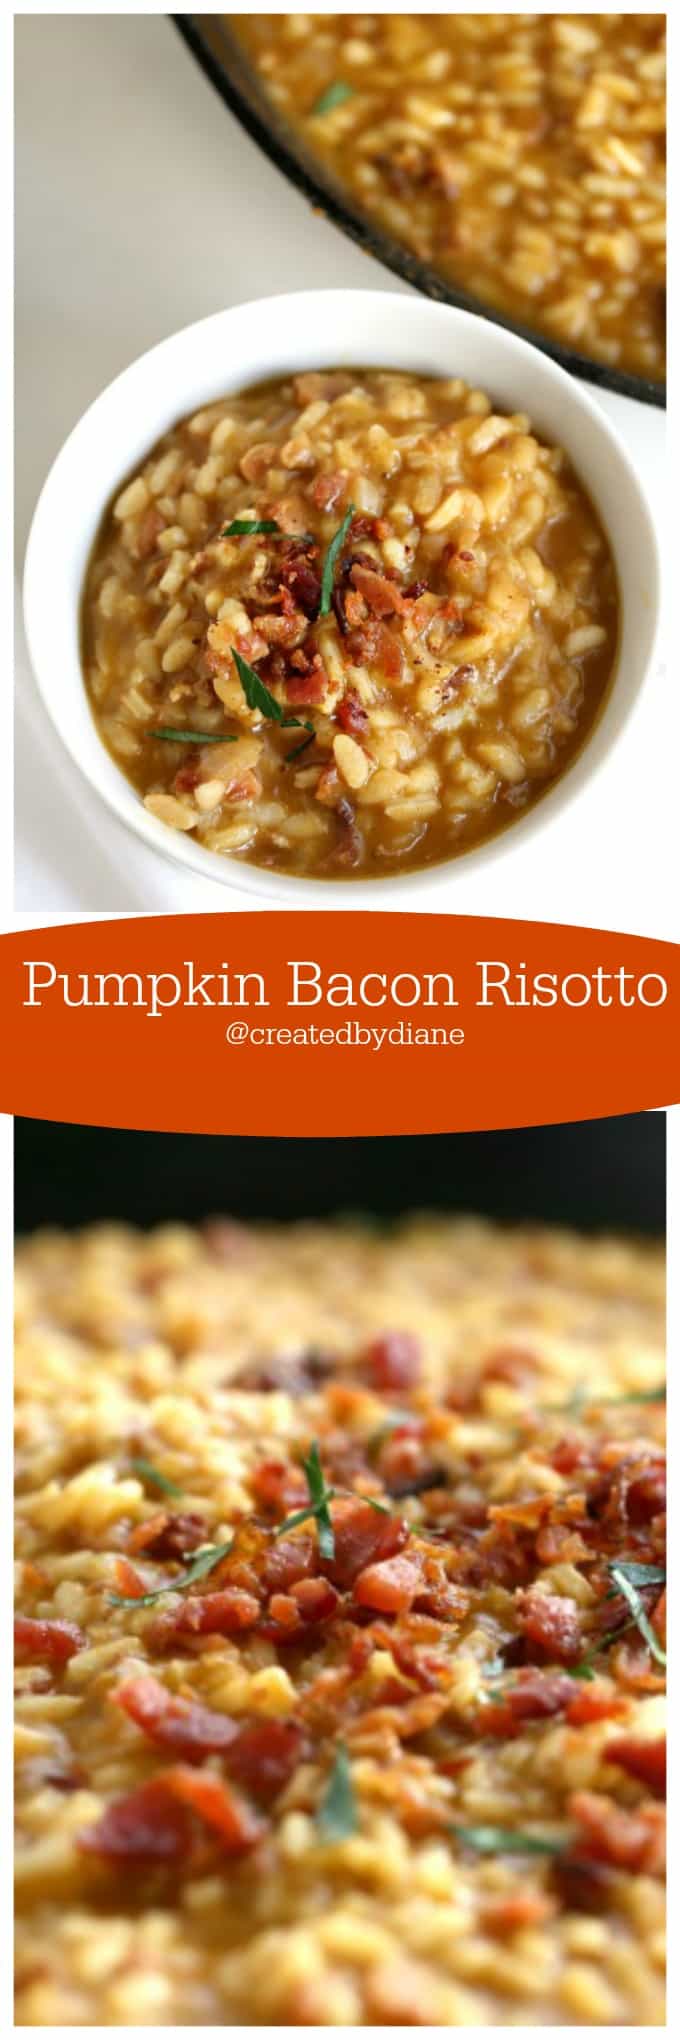 Pumpkin Bacon Risotto from @createdbydiane